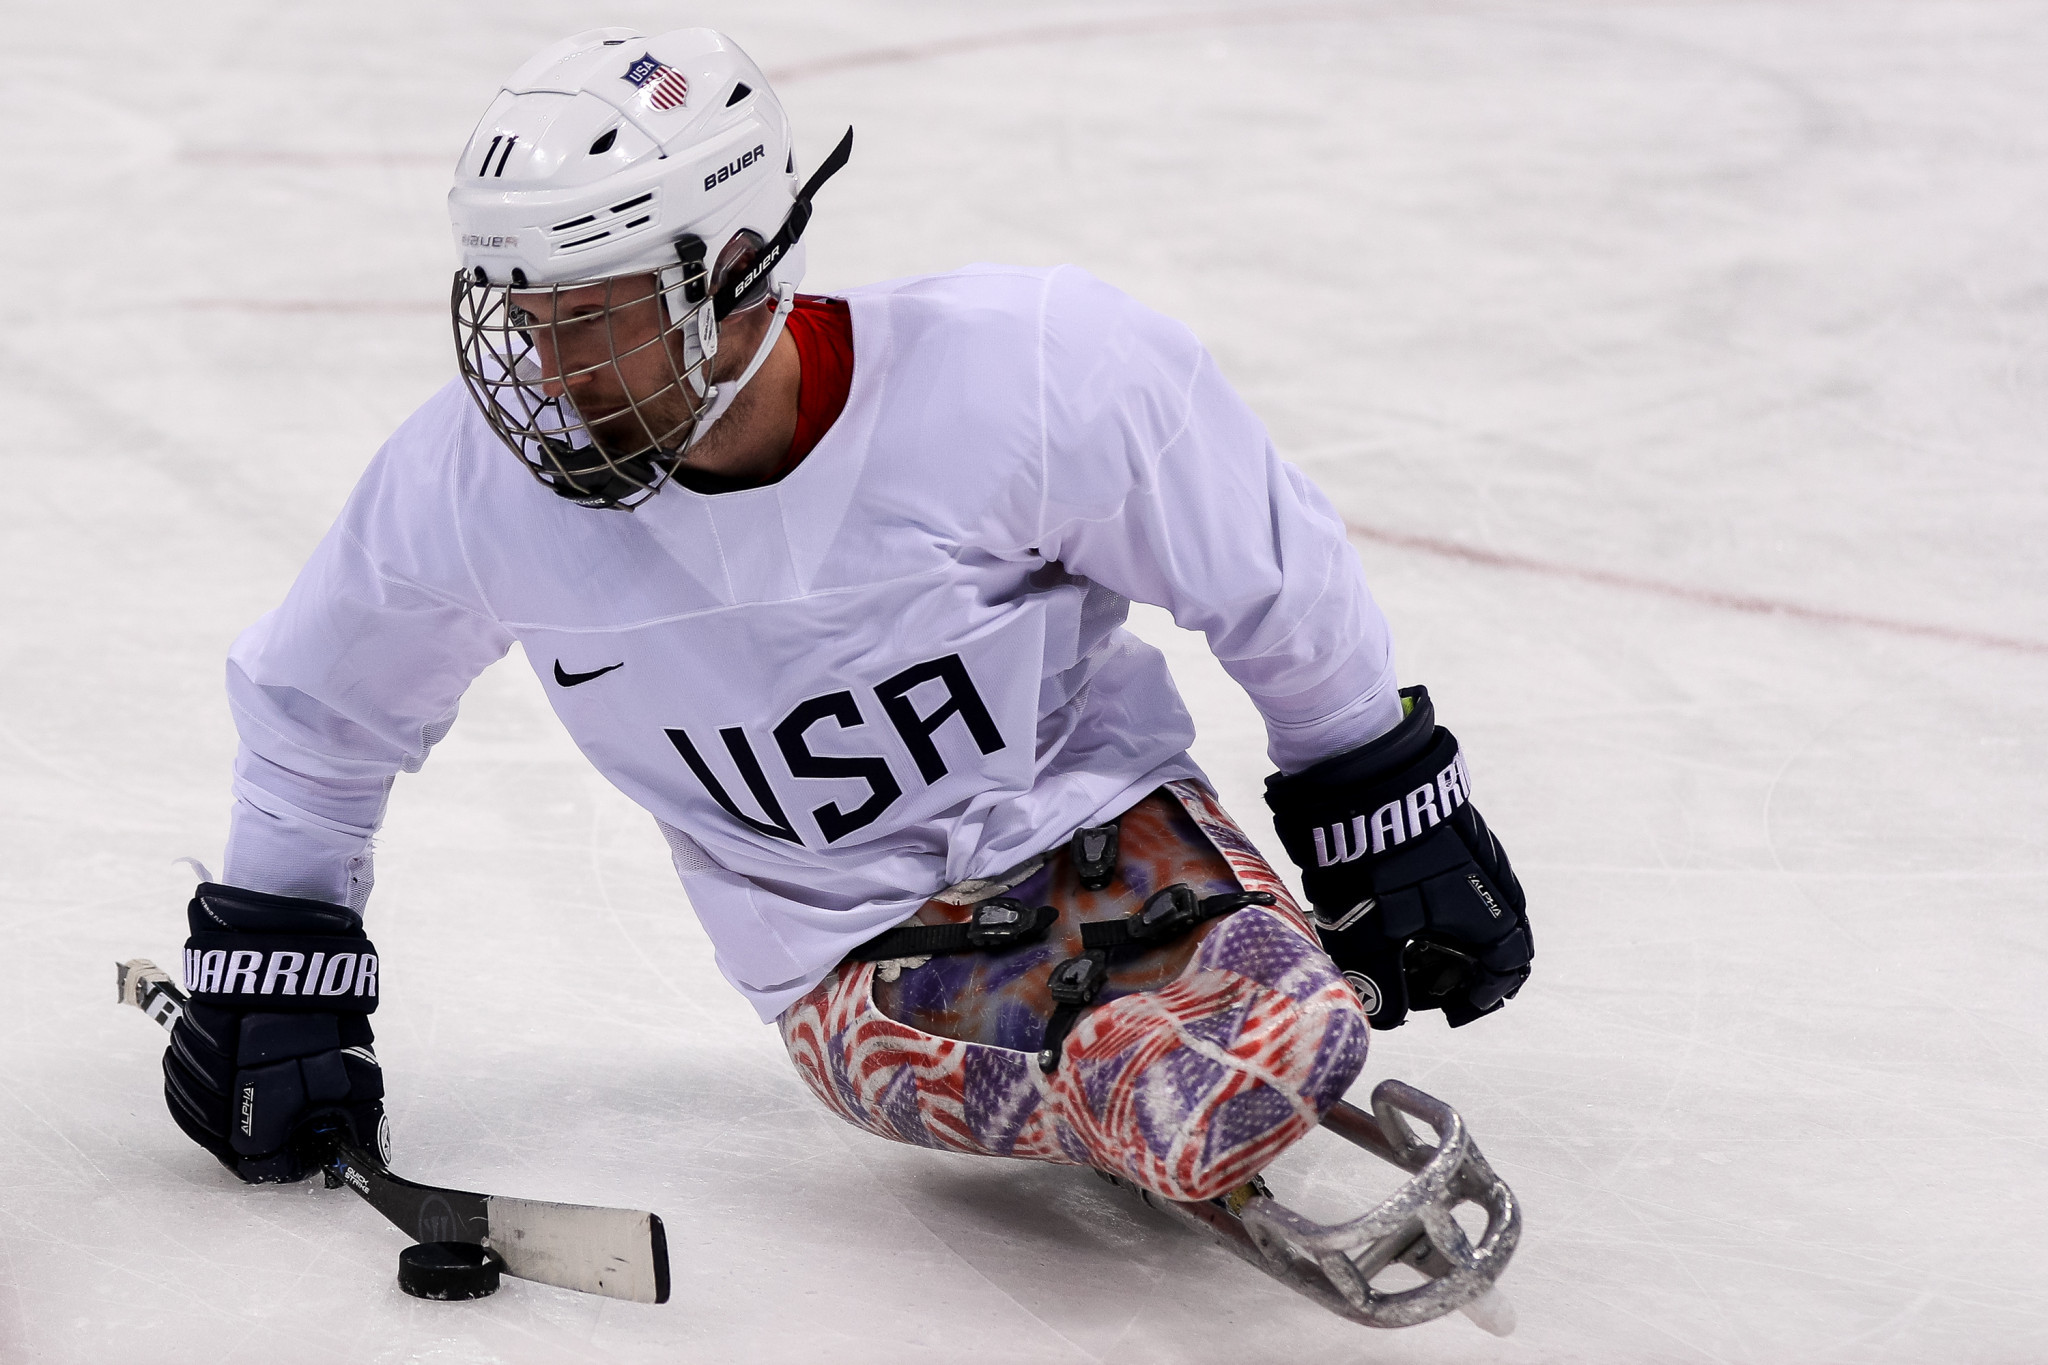 American ice hockey player to lose Paralympic gold medal after failed test at Pyeongchang 2018